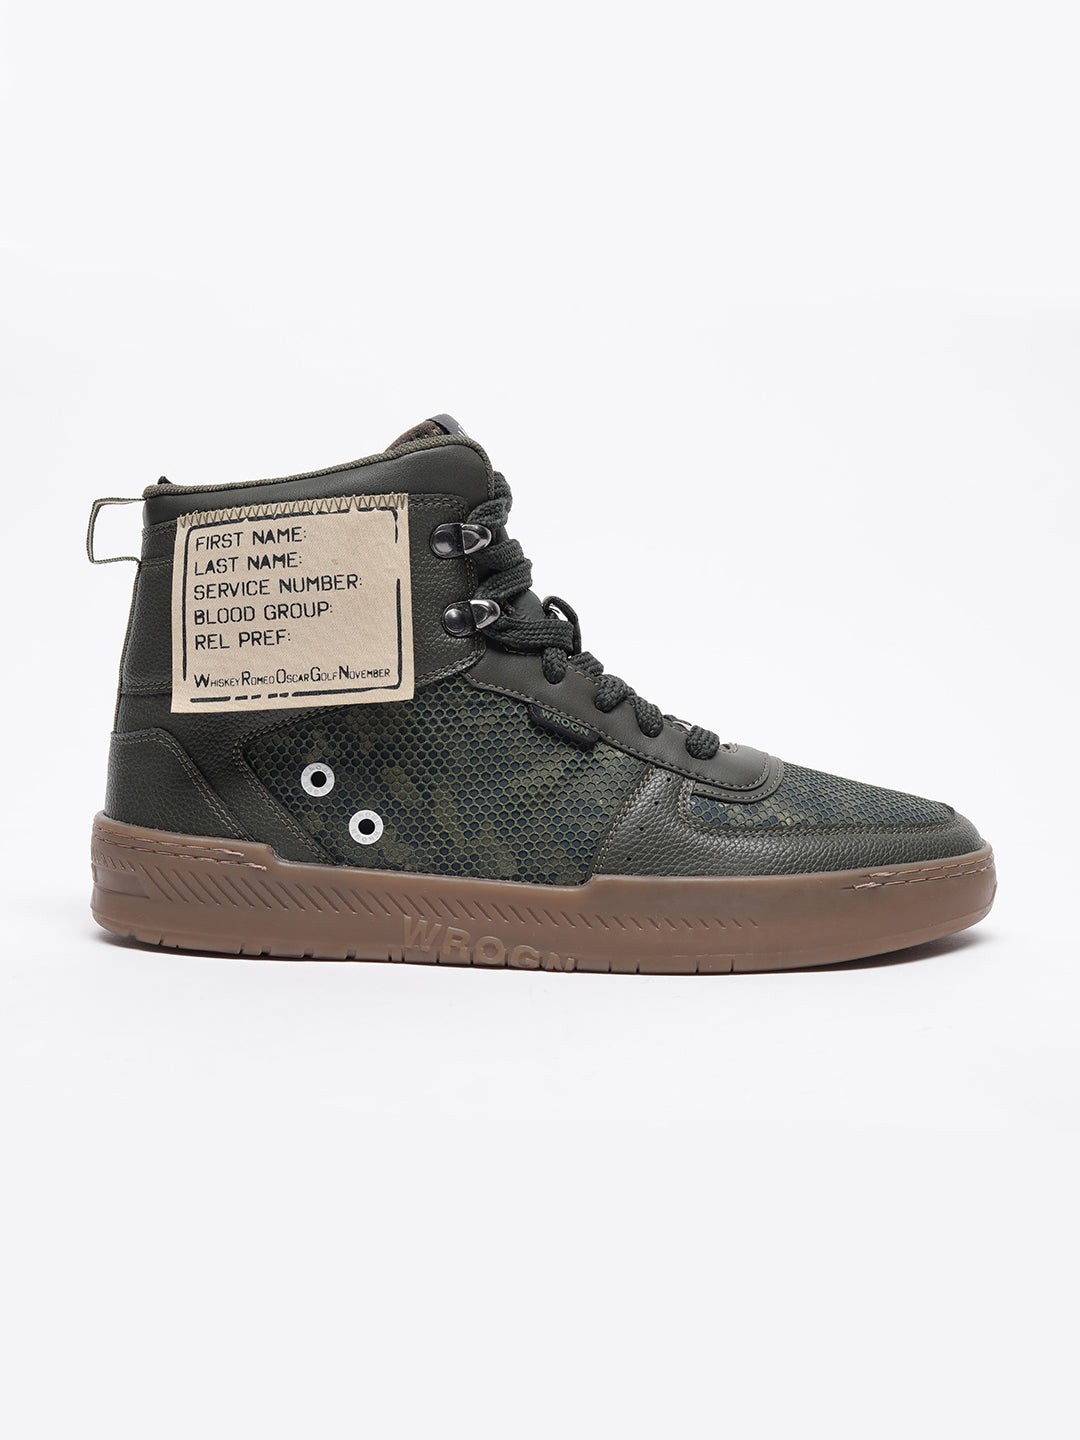 Olive Camo High Top Sneakers